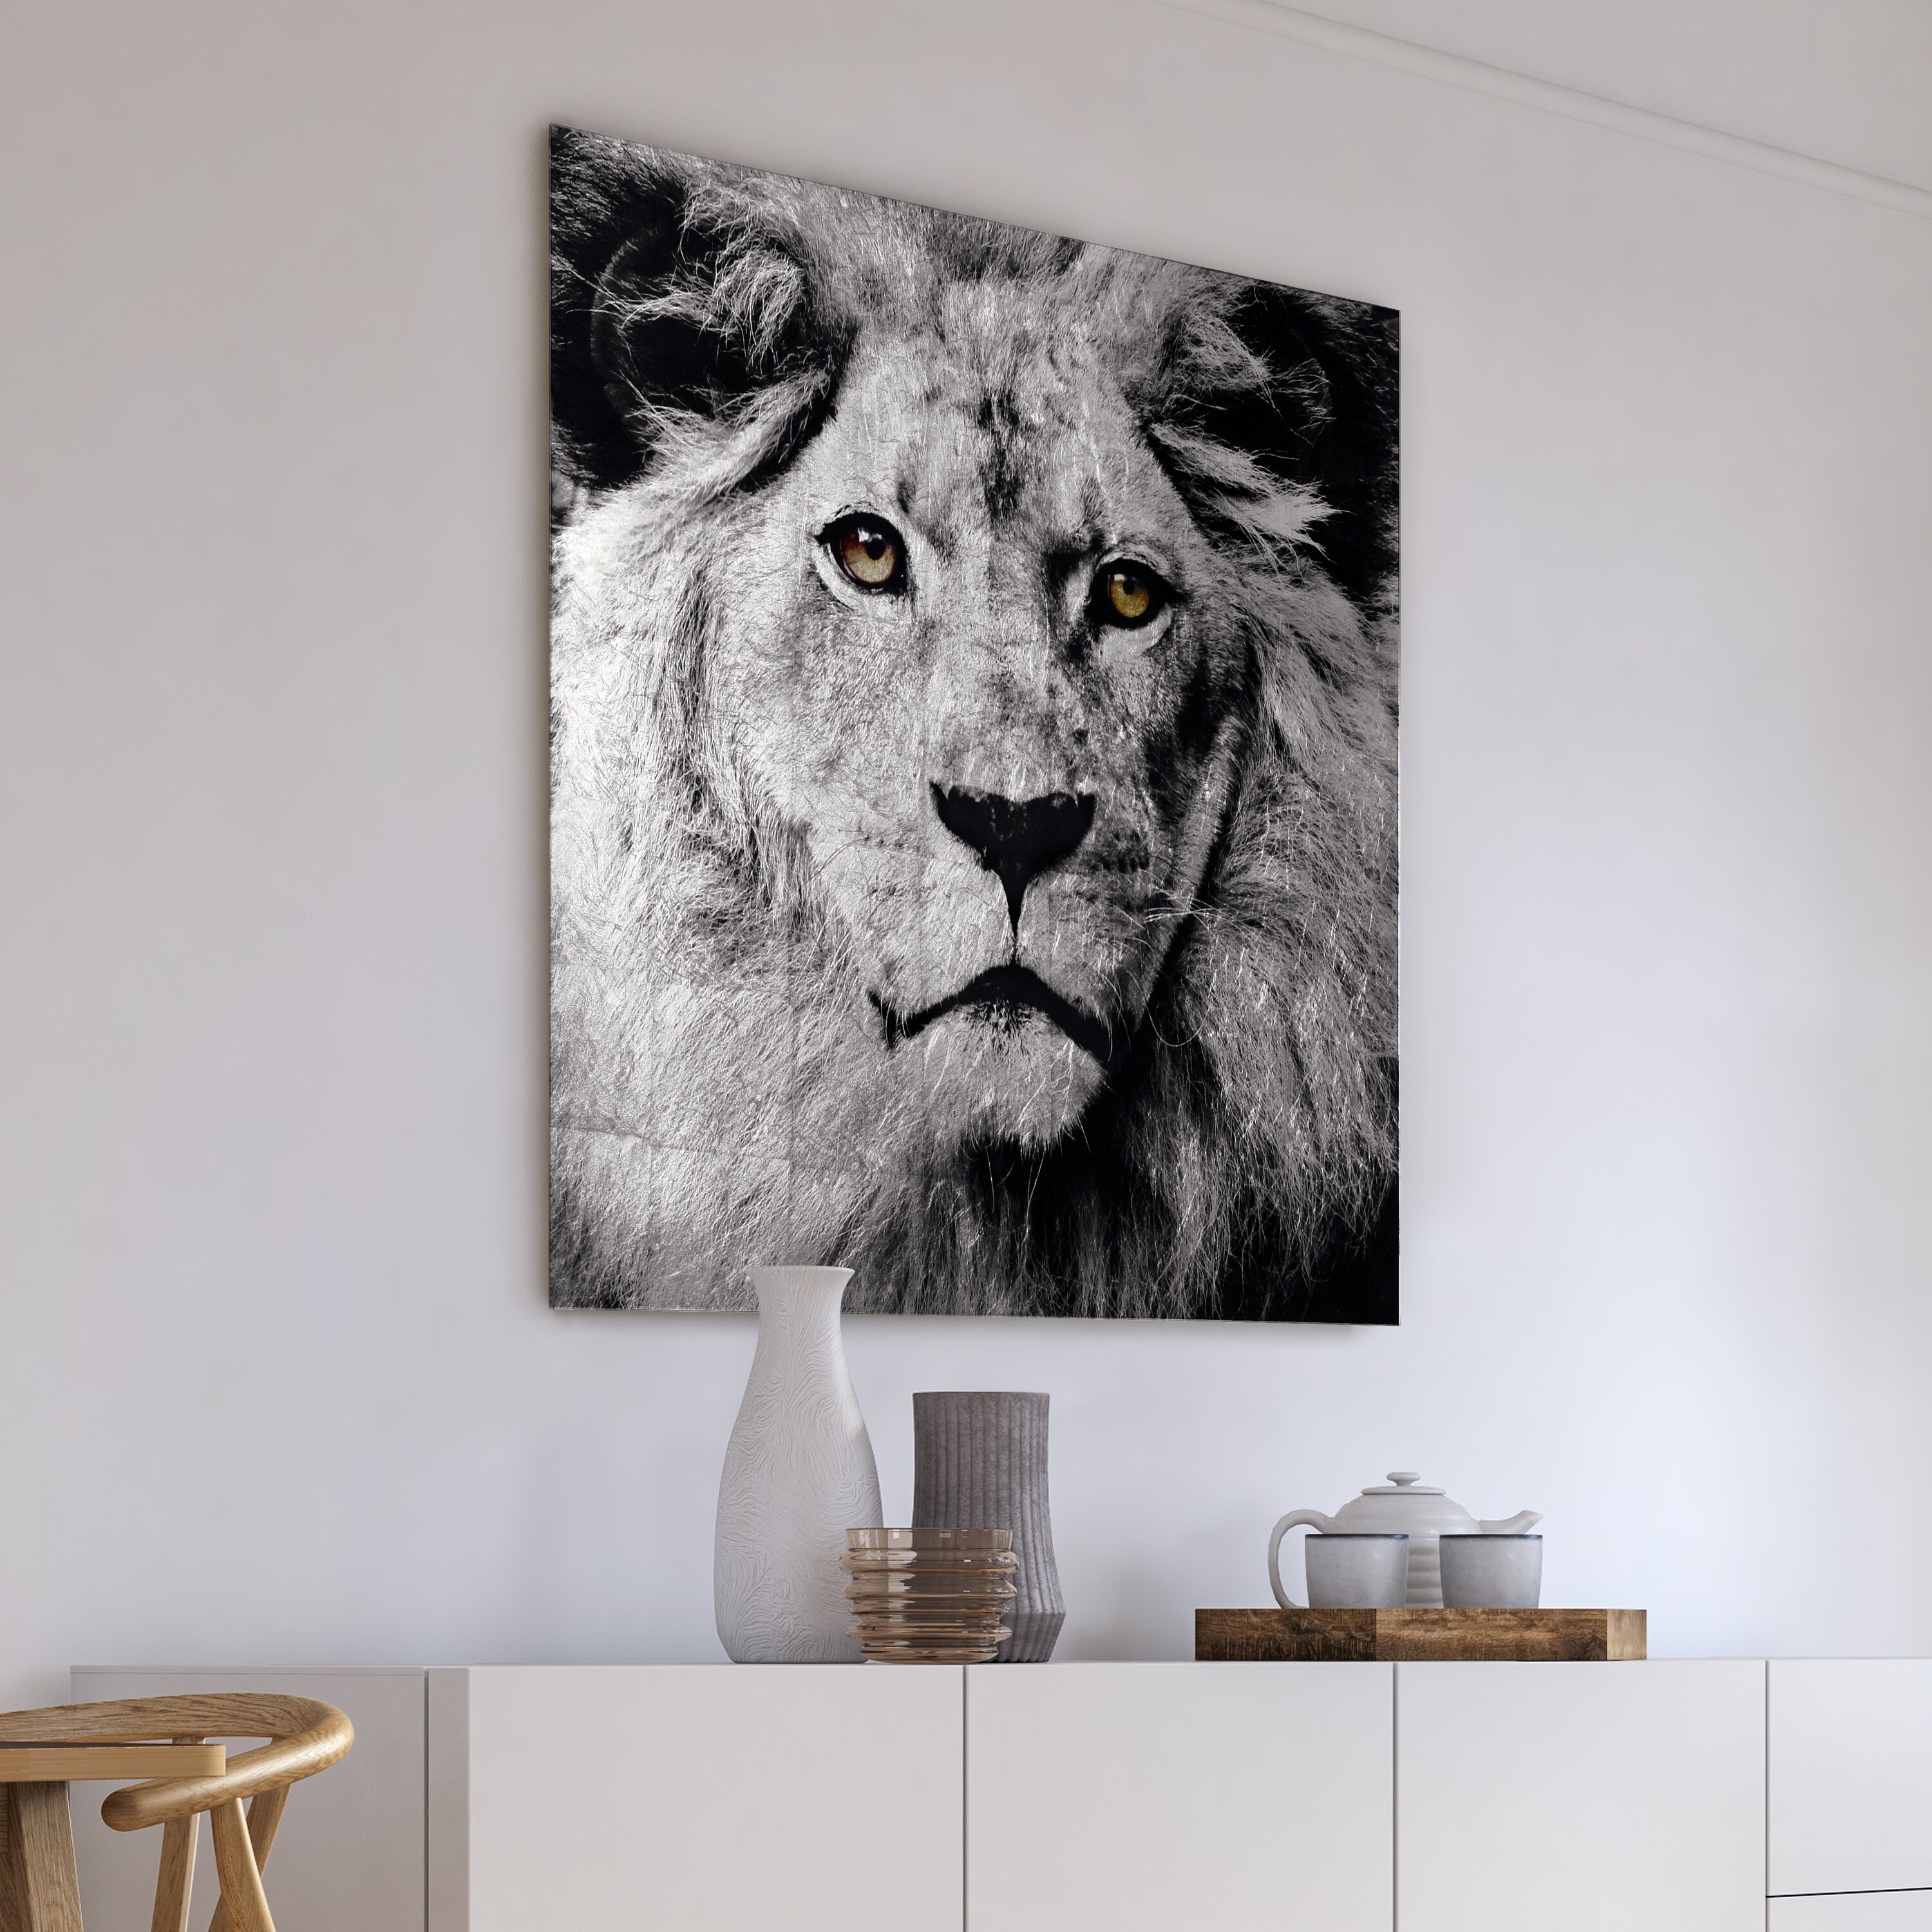 Empire Art Direct 36-in H x 36-in W Animals Glass Print in the 